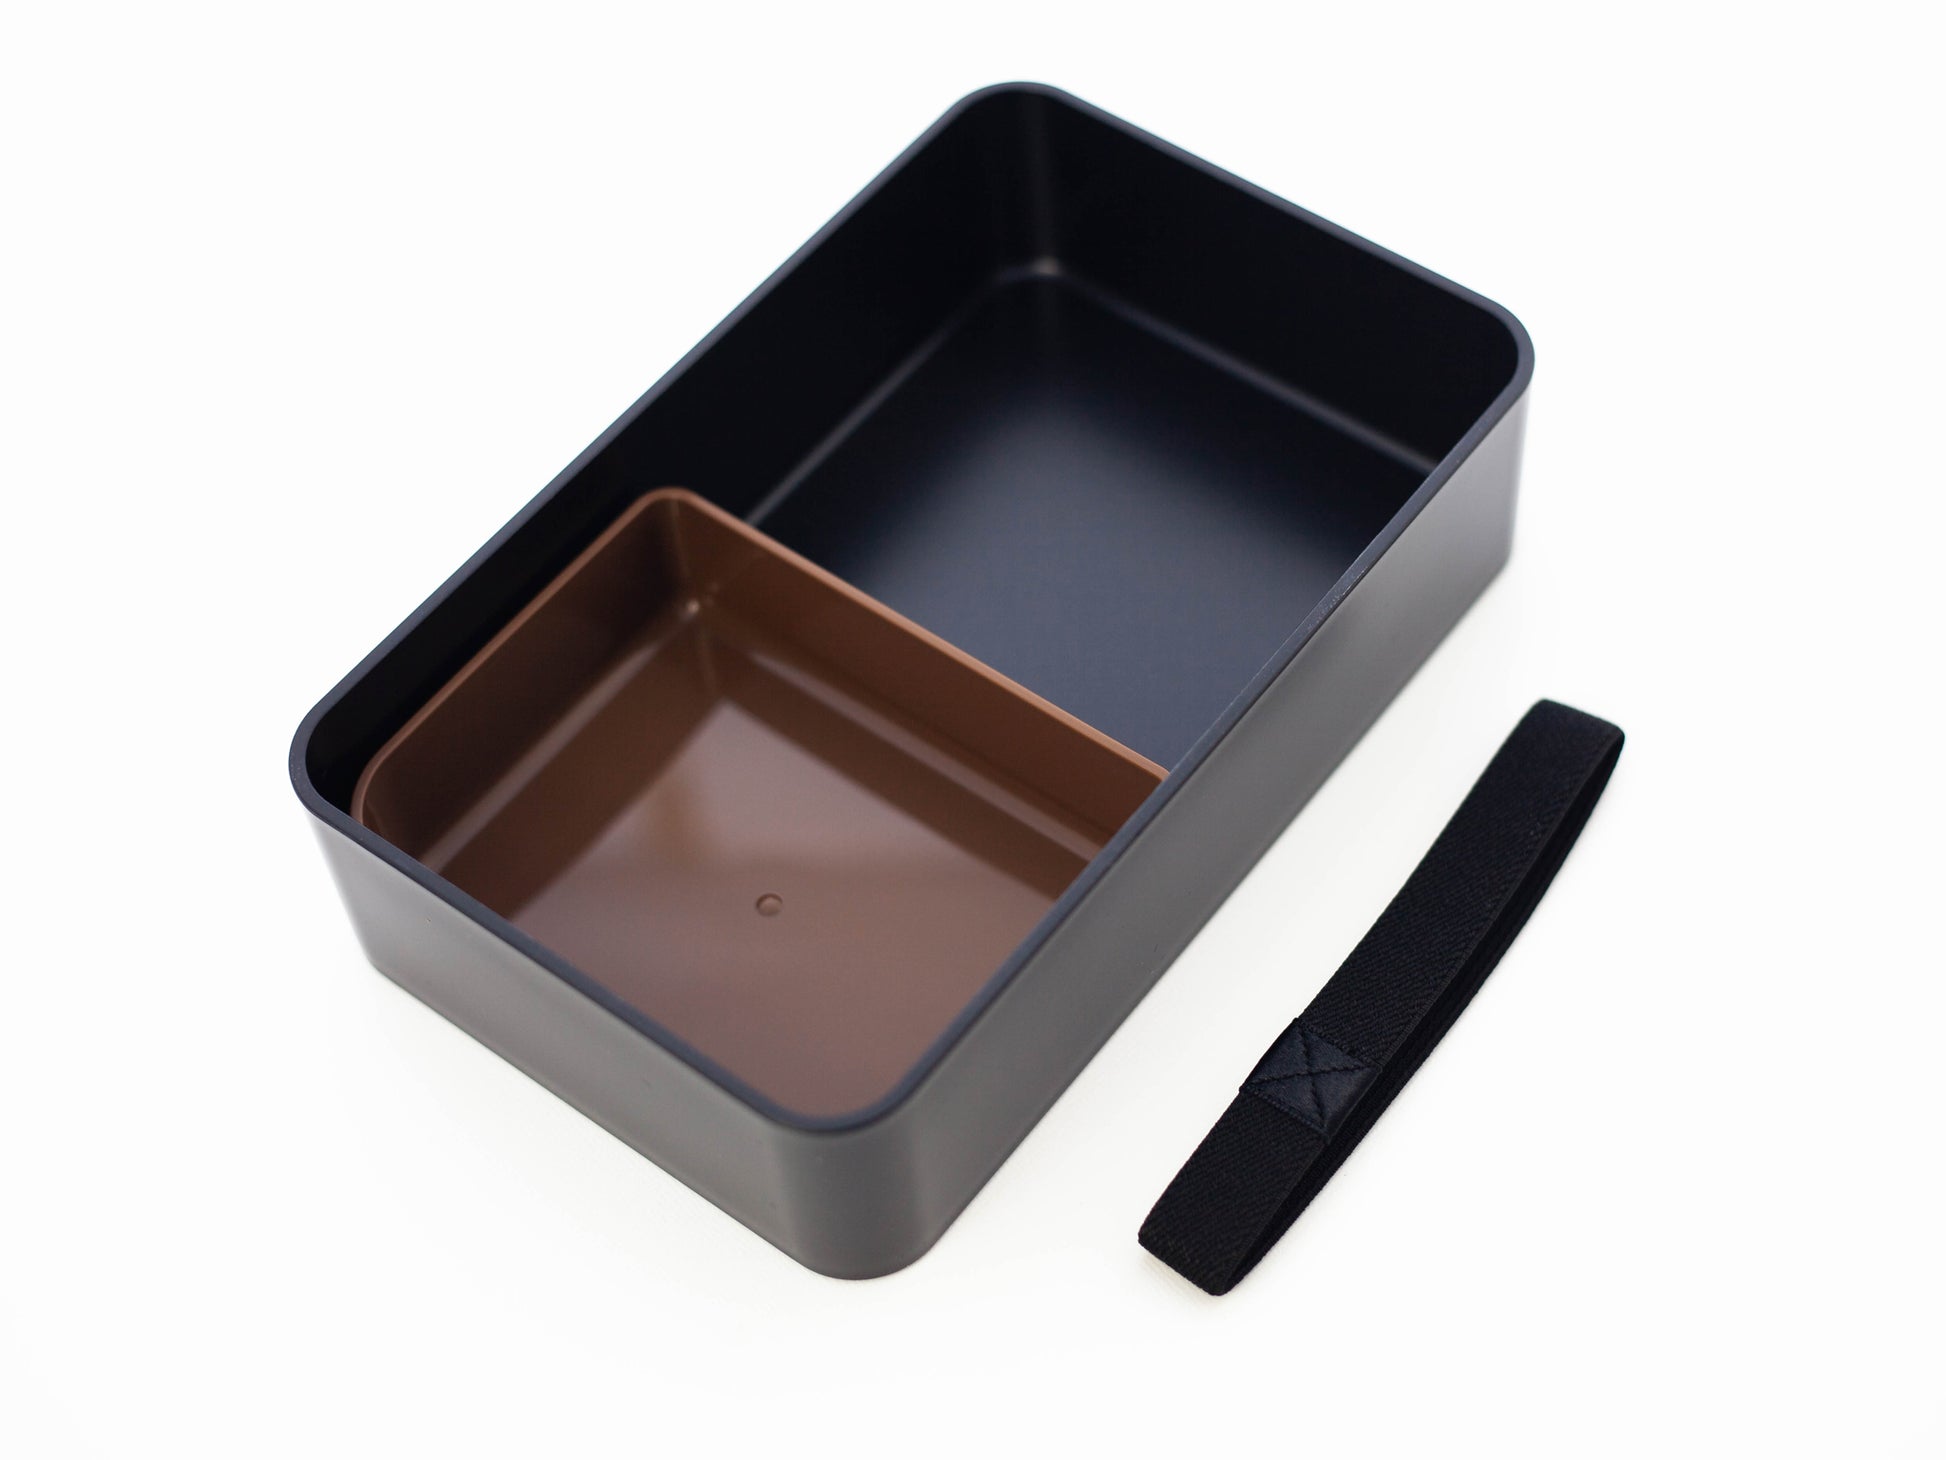 Woodgrain One Tier Bento Box 800mL | Cherry by Hakoya - Bento&co Japanese Bento Lunch Boxes and Kitchenware Specialists